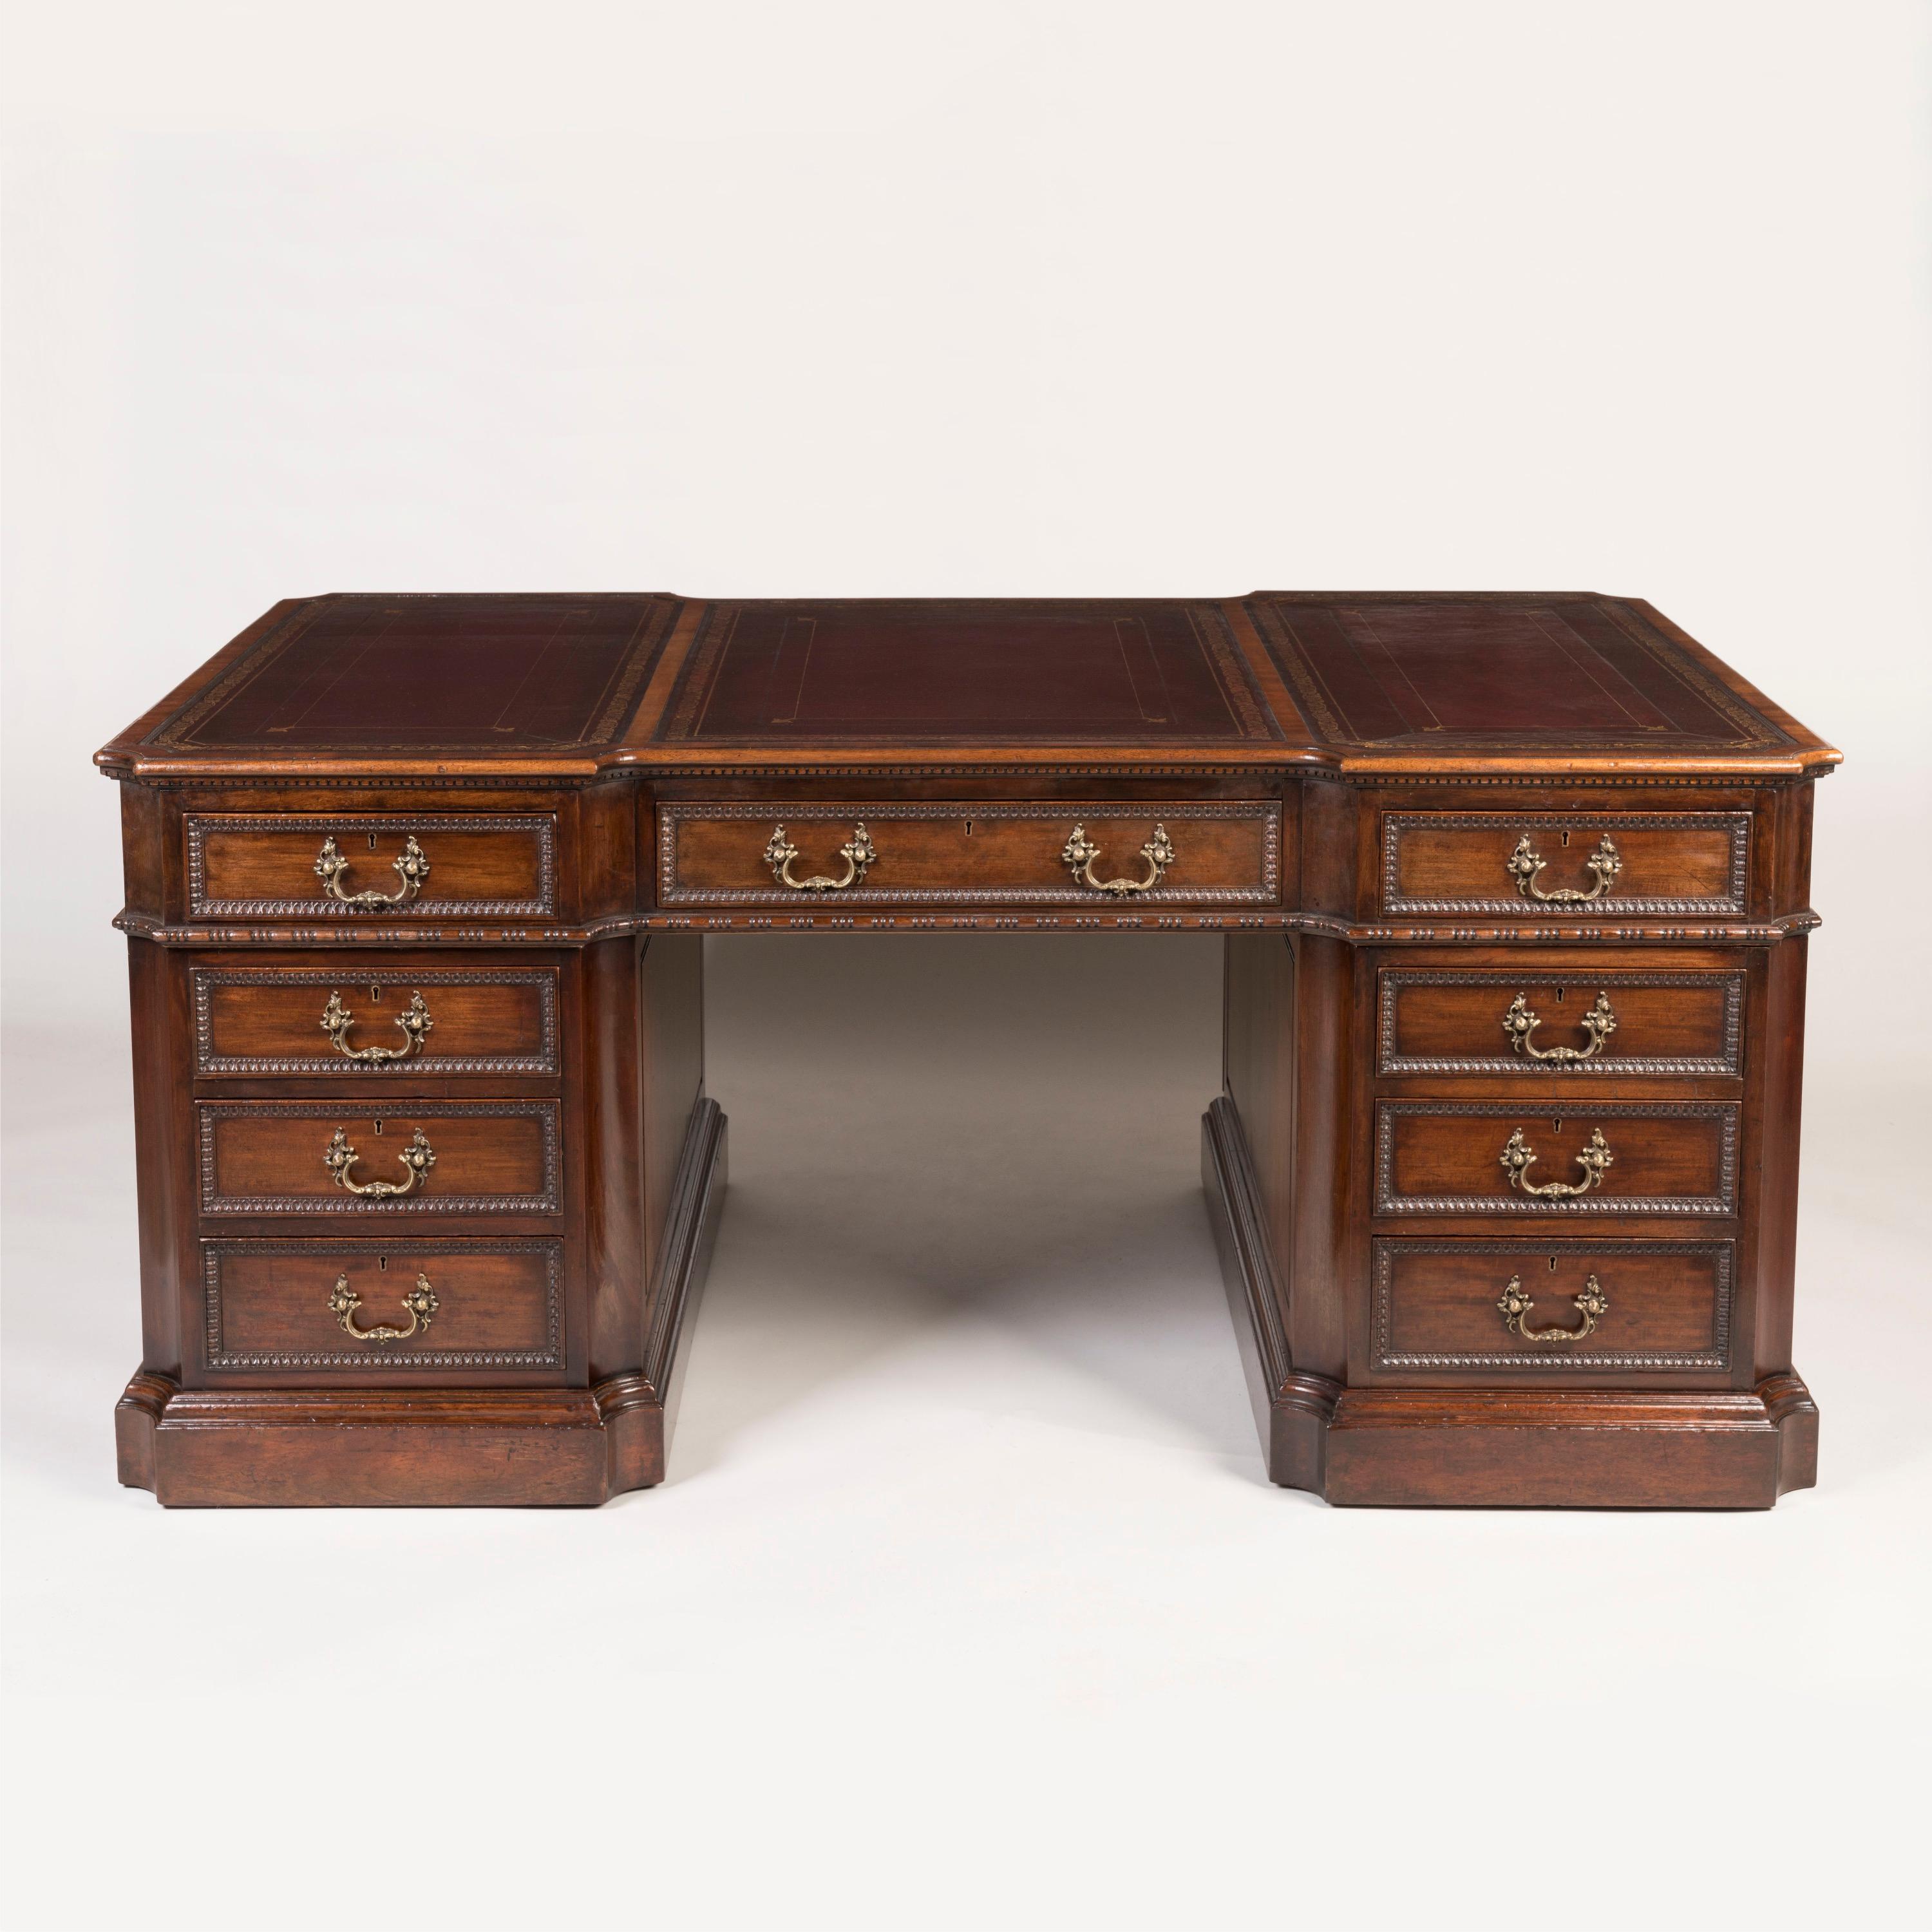 A Handsome Partner's Desk
After the Chippendale Design

Made from fine mahogany, with finely cast brass hardware, the desk supported on rolling casters hidden under the thumbnail moulded plinth, each pedestal with incurved corners housing a bank